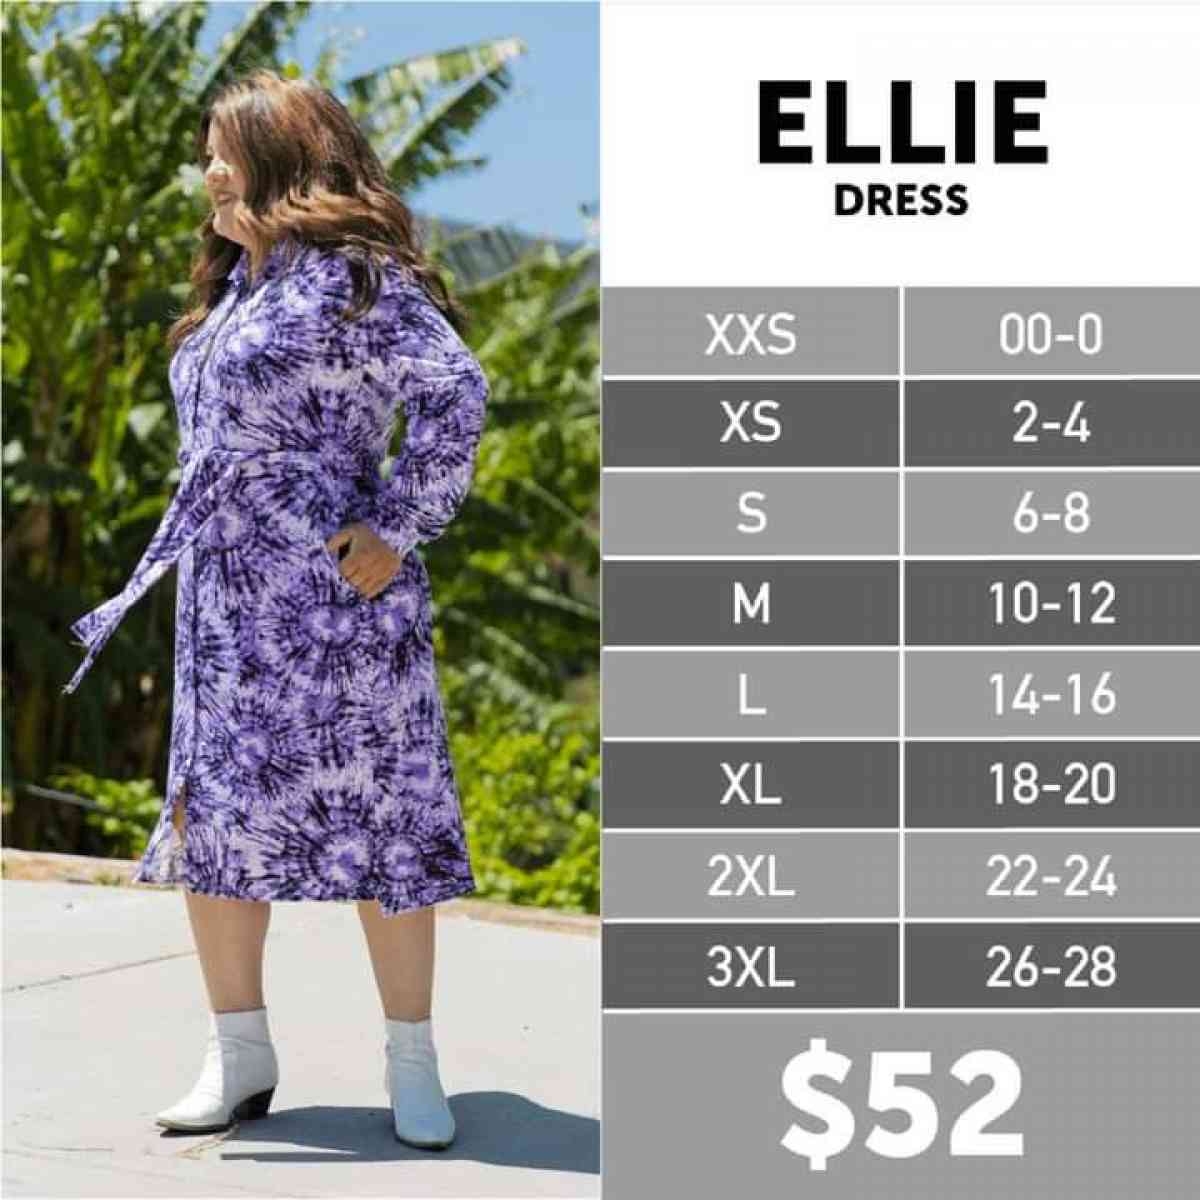 NWT 3XL LuLaRoe Ellie 25 Fits size 26 to 28 Retails for  52